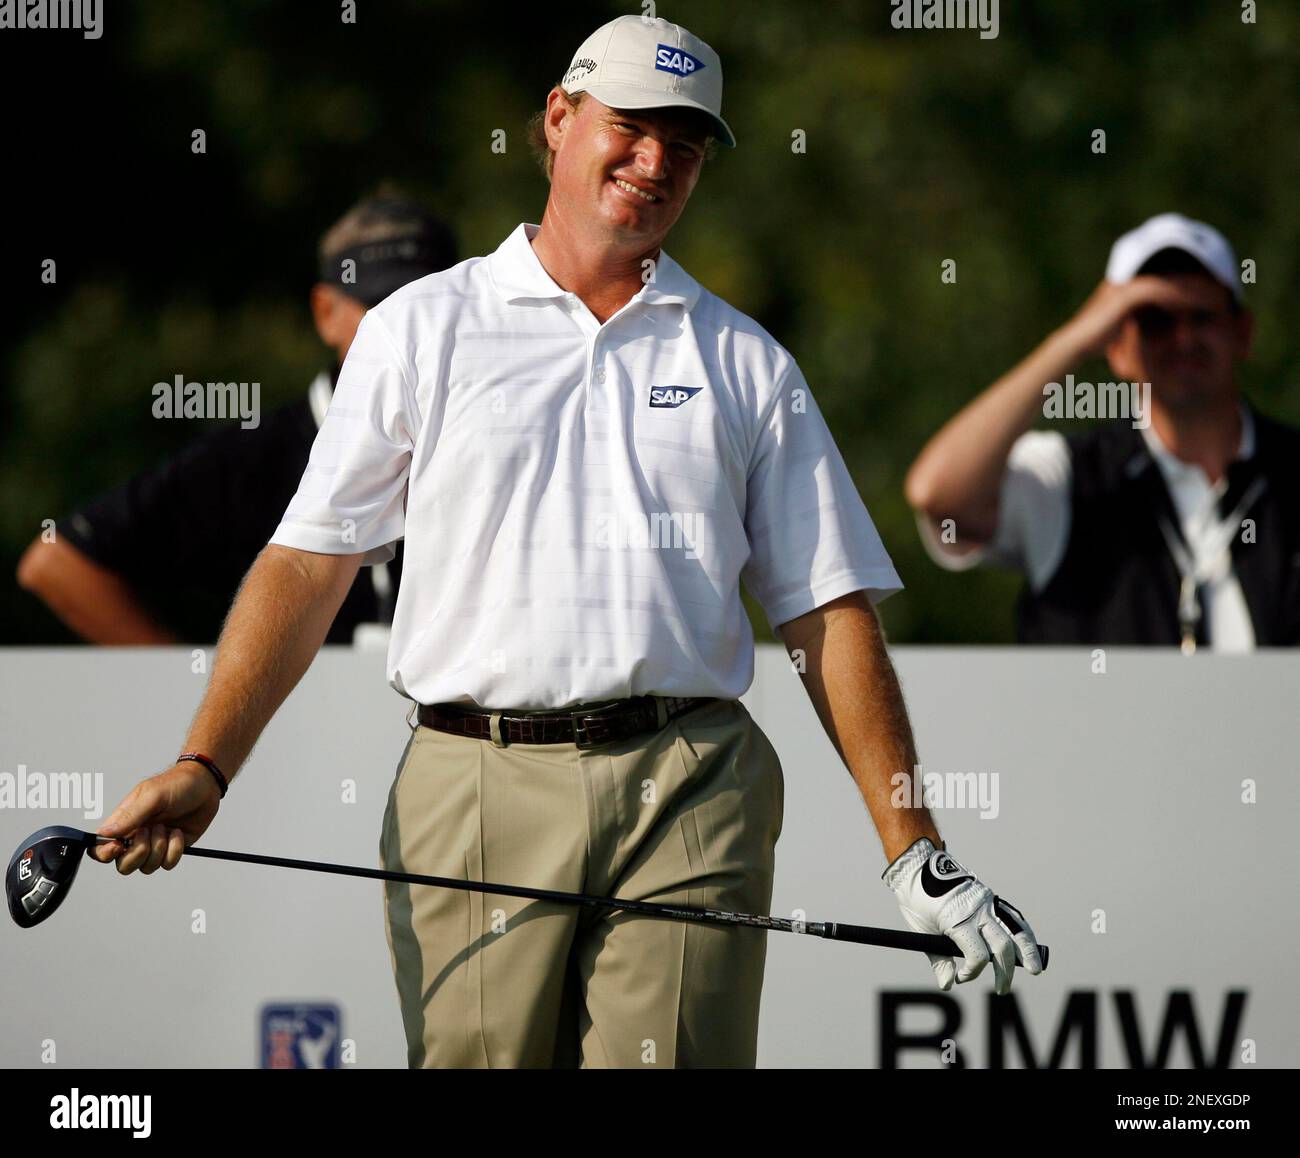 Ernie Els of South Africa, reacts after his tee shot on the 18th hole  during the 47th Chick Evans Memorial Pro-Am at the BMW Championship golf  tournament in Lemont, Ill., Wednesday, Sept.